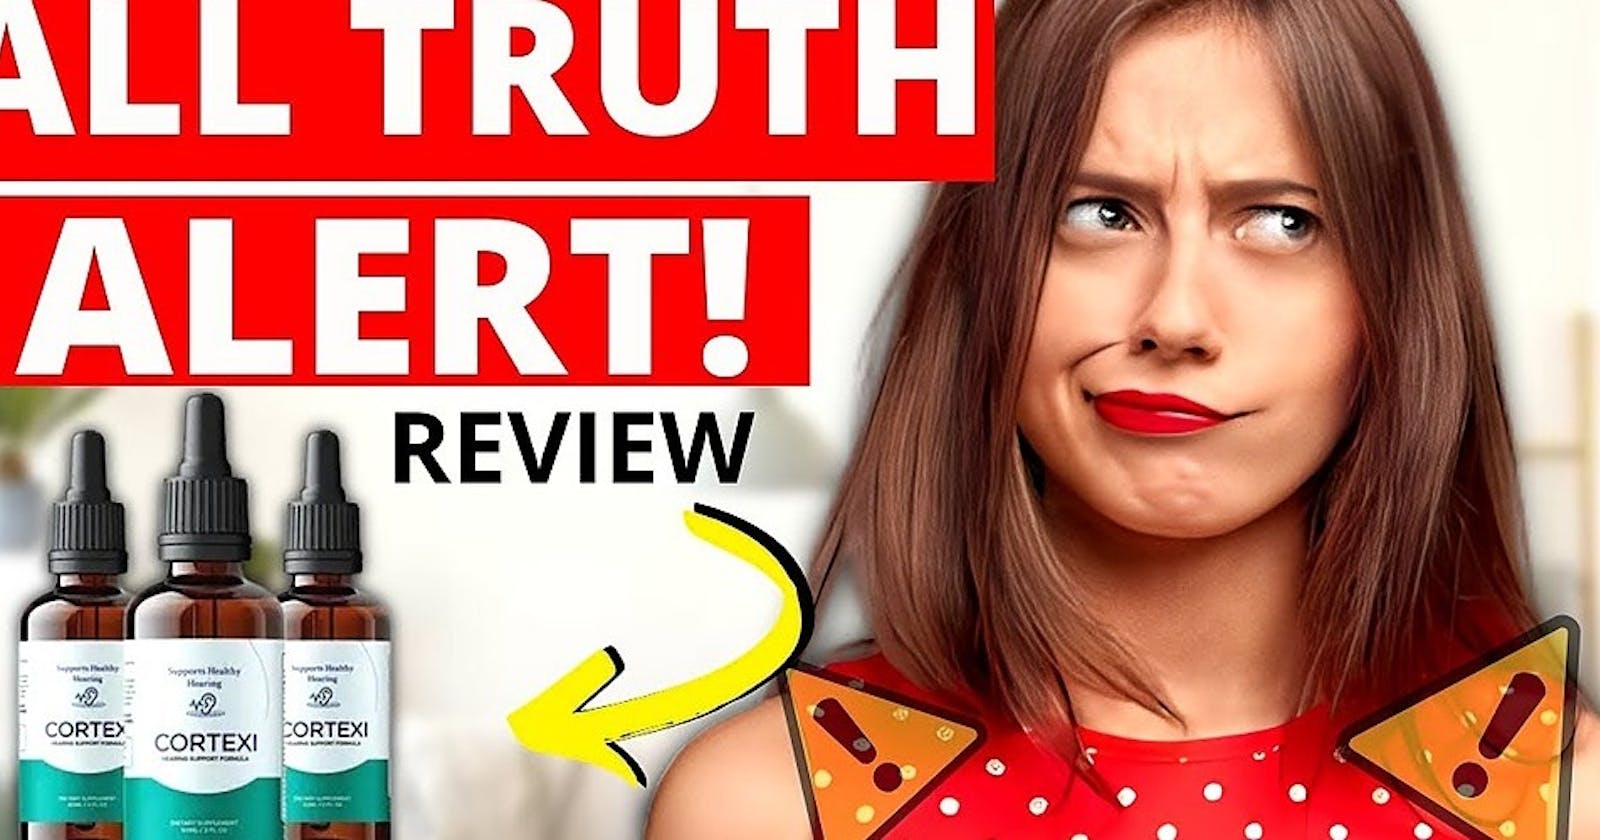 Cortexi Reviews (TRUTH REVEALED!) What They Won't Tell You About This Product!